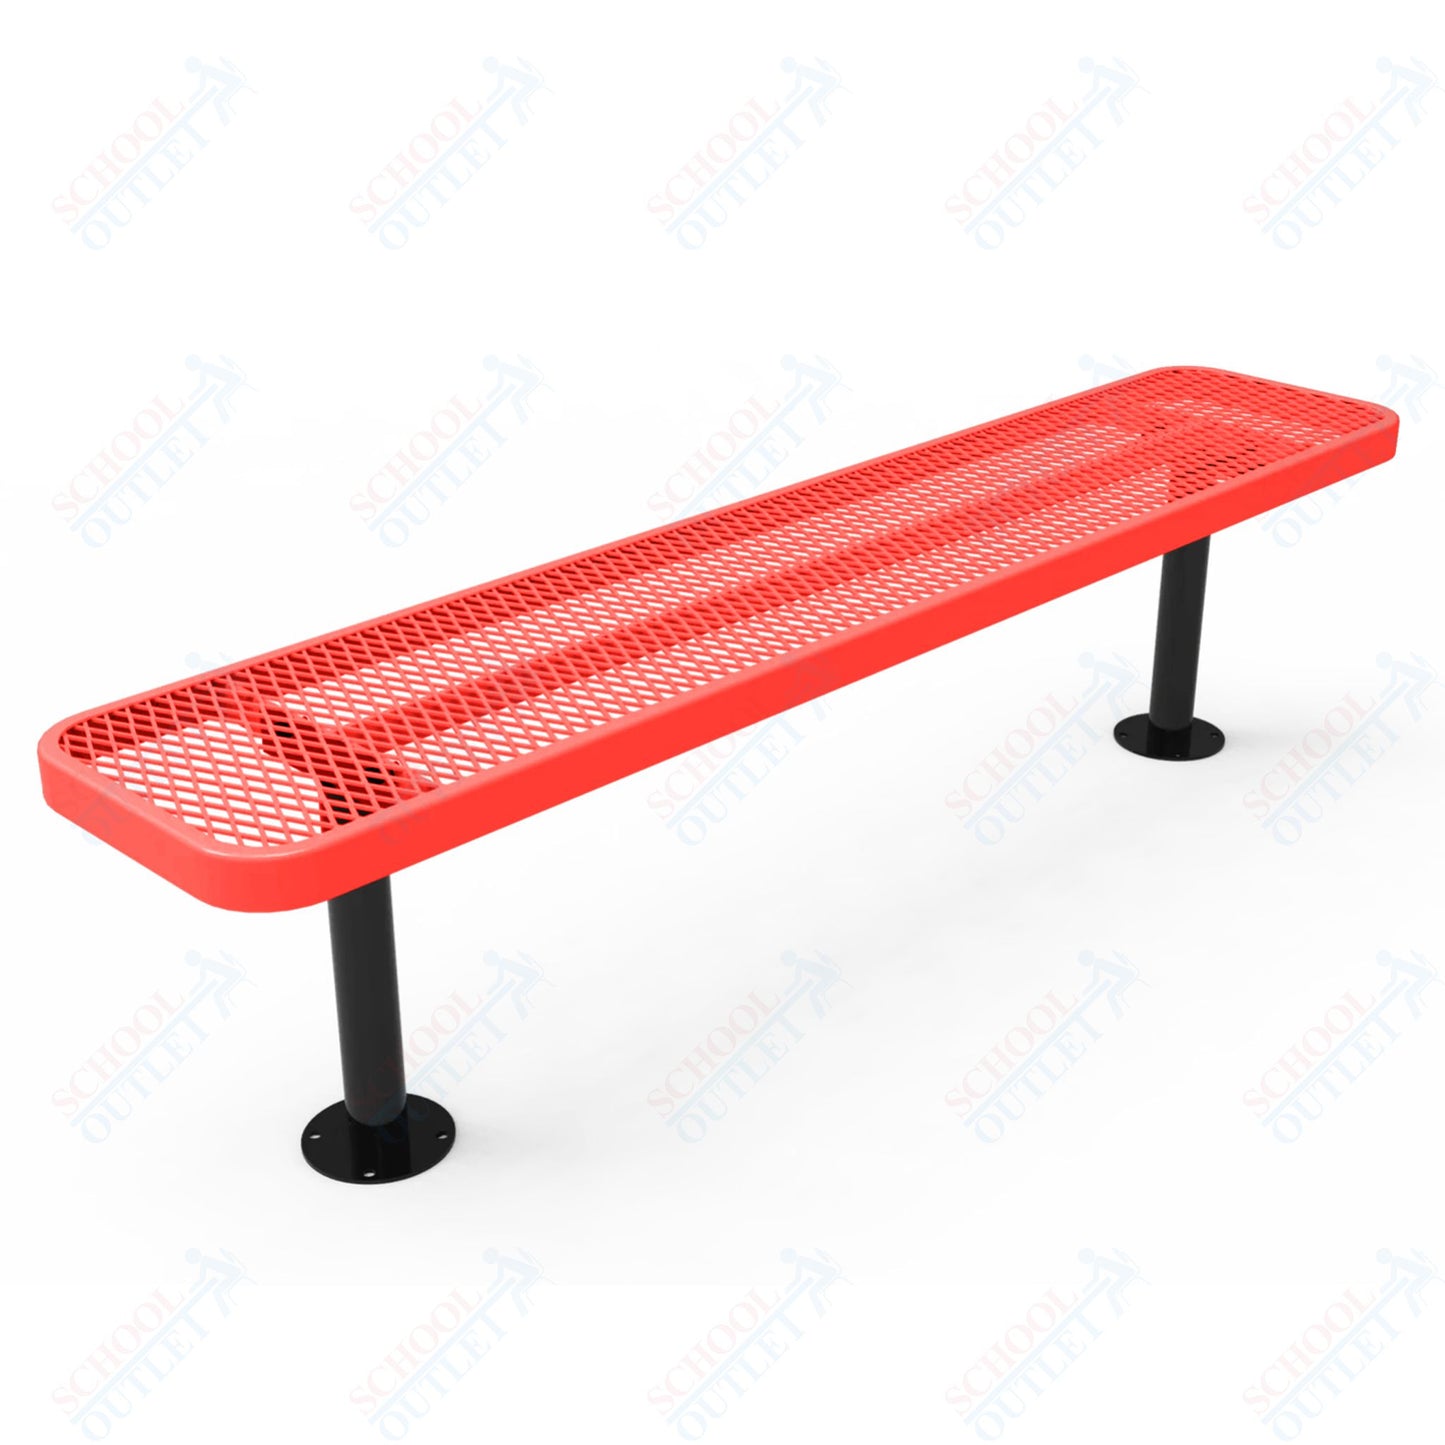 MyTcoat - Player's Outdoor Bench without Back - Surface Mount 6' L (MYT-BPY06-35)